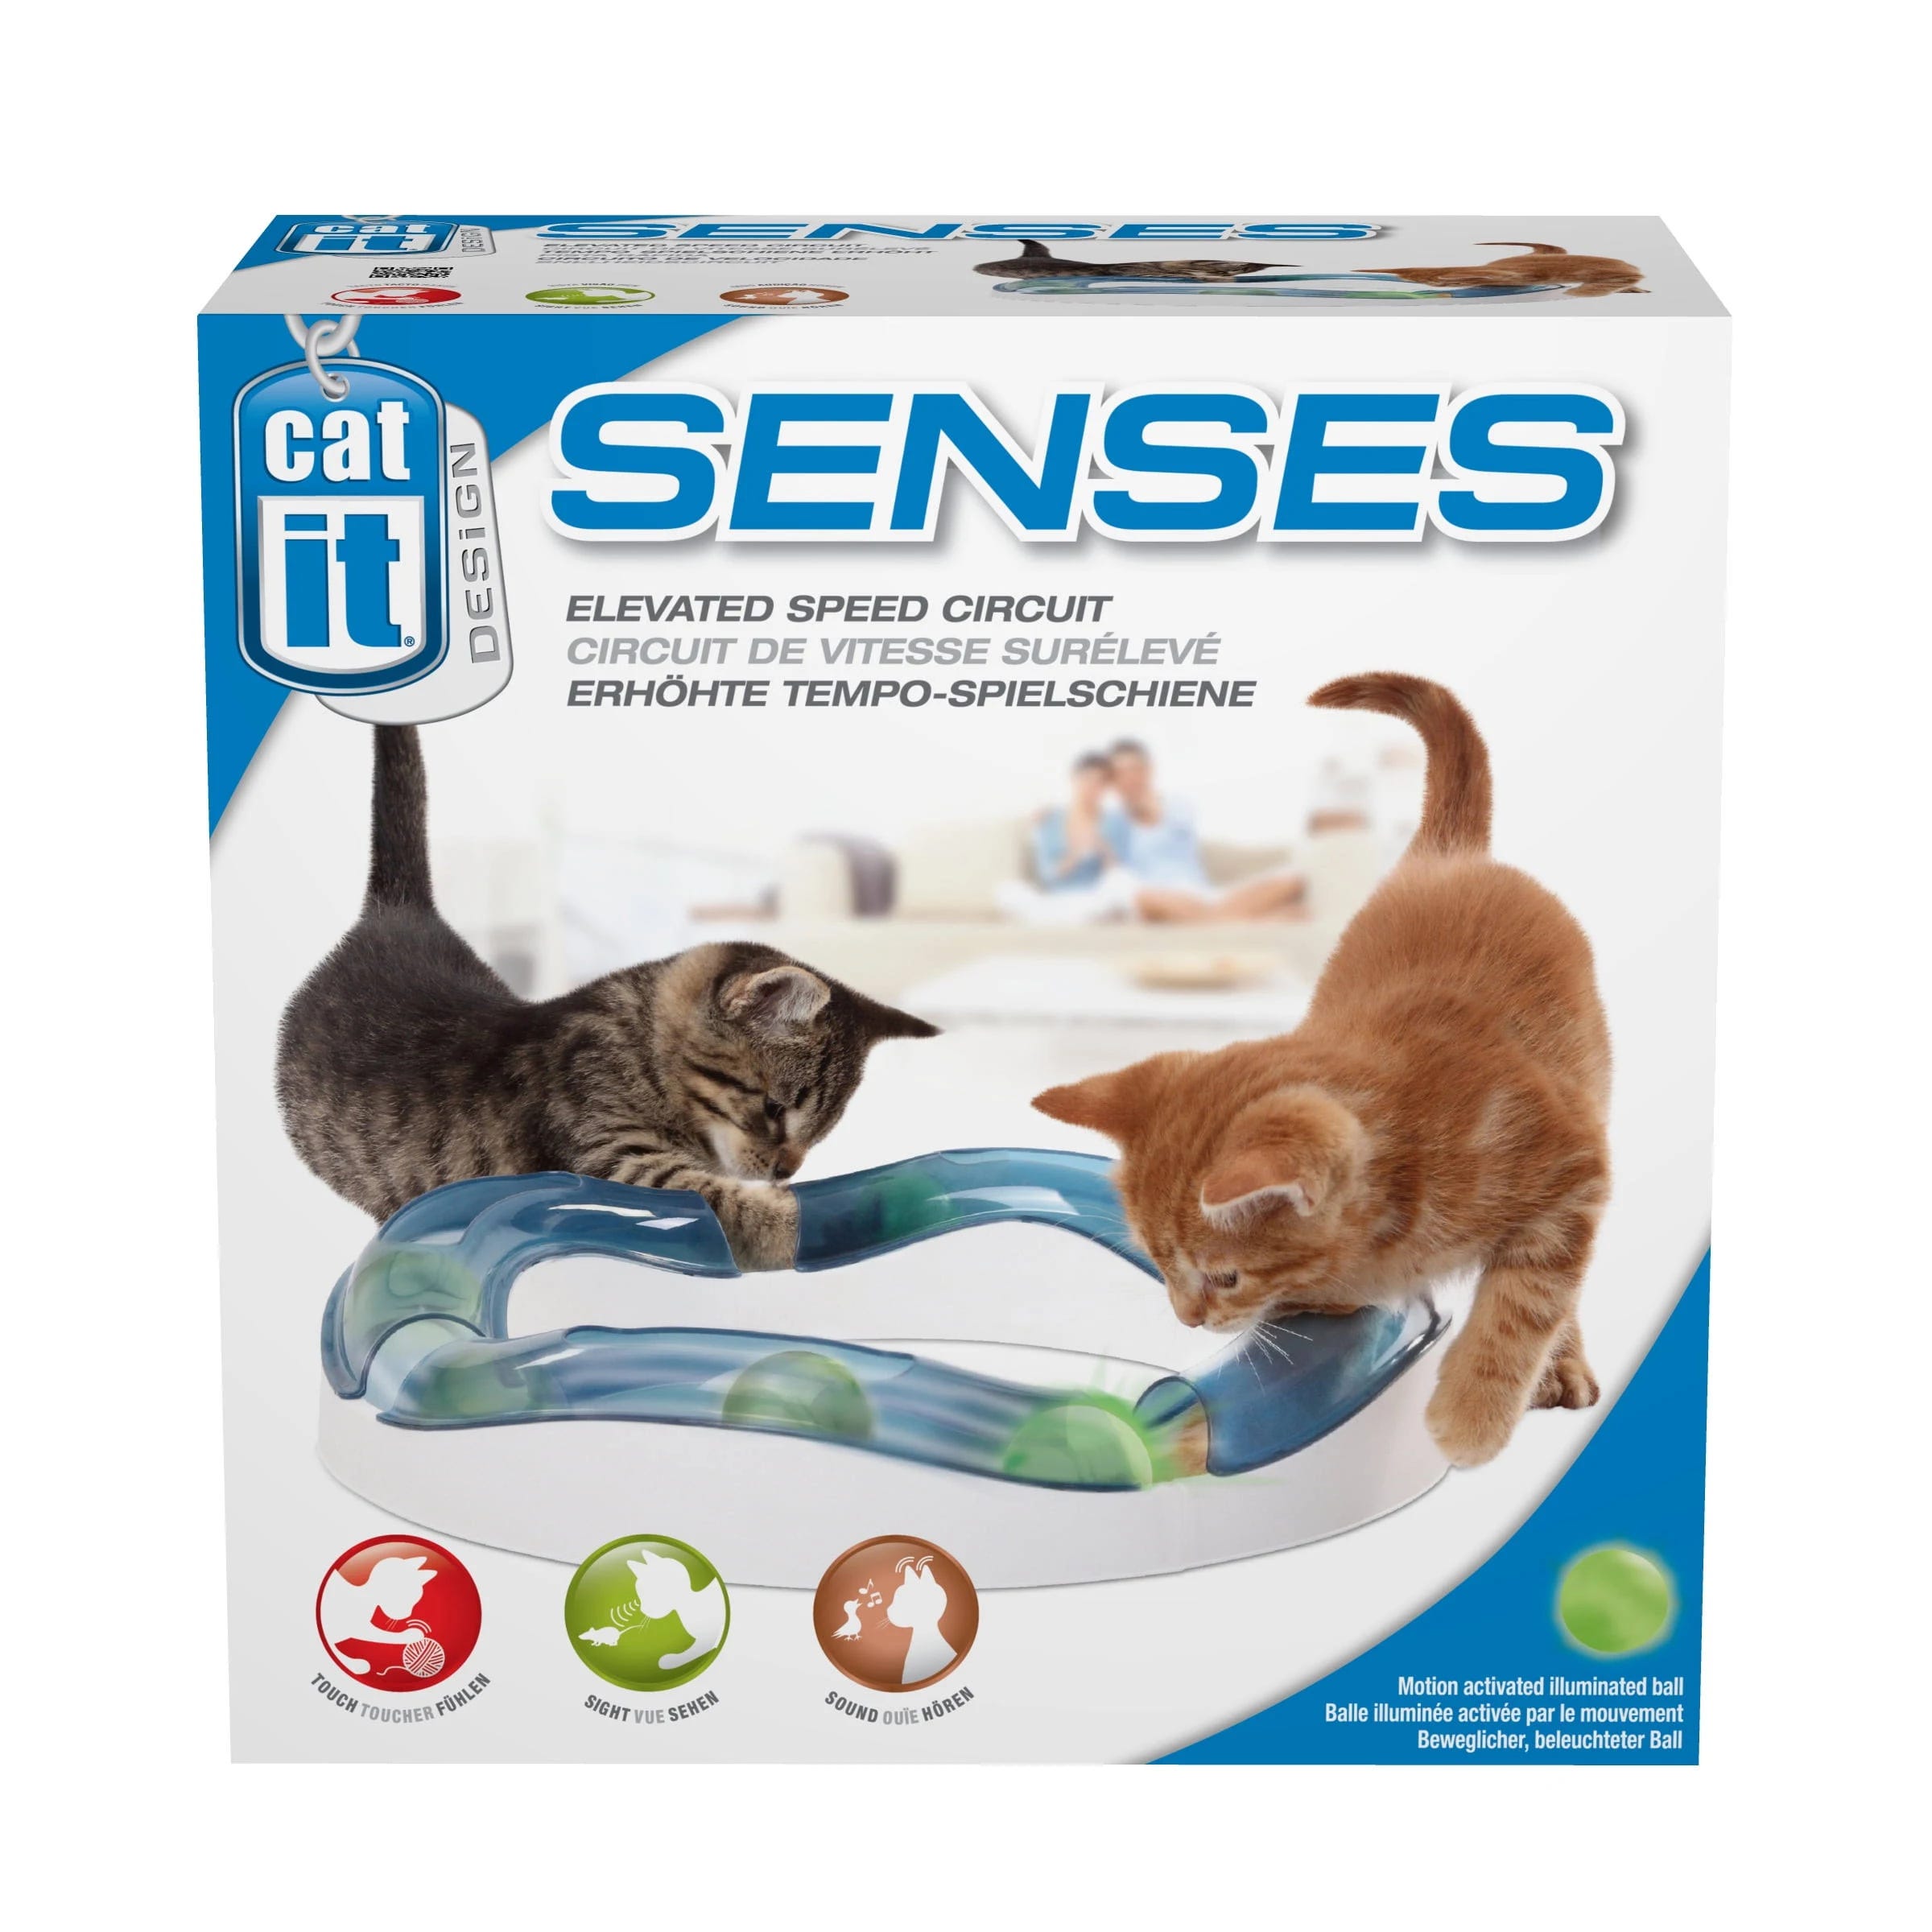 Catit Design Senses Speed Circuit Cat Toy for Sensory and Physical Engagement | Image